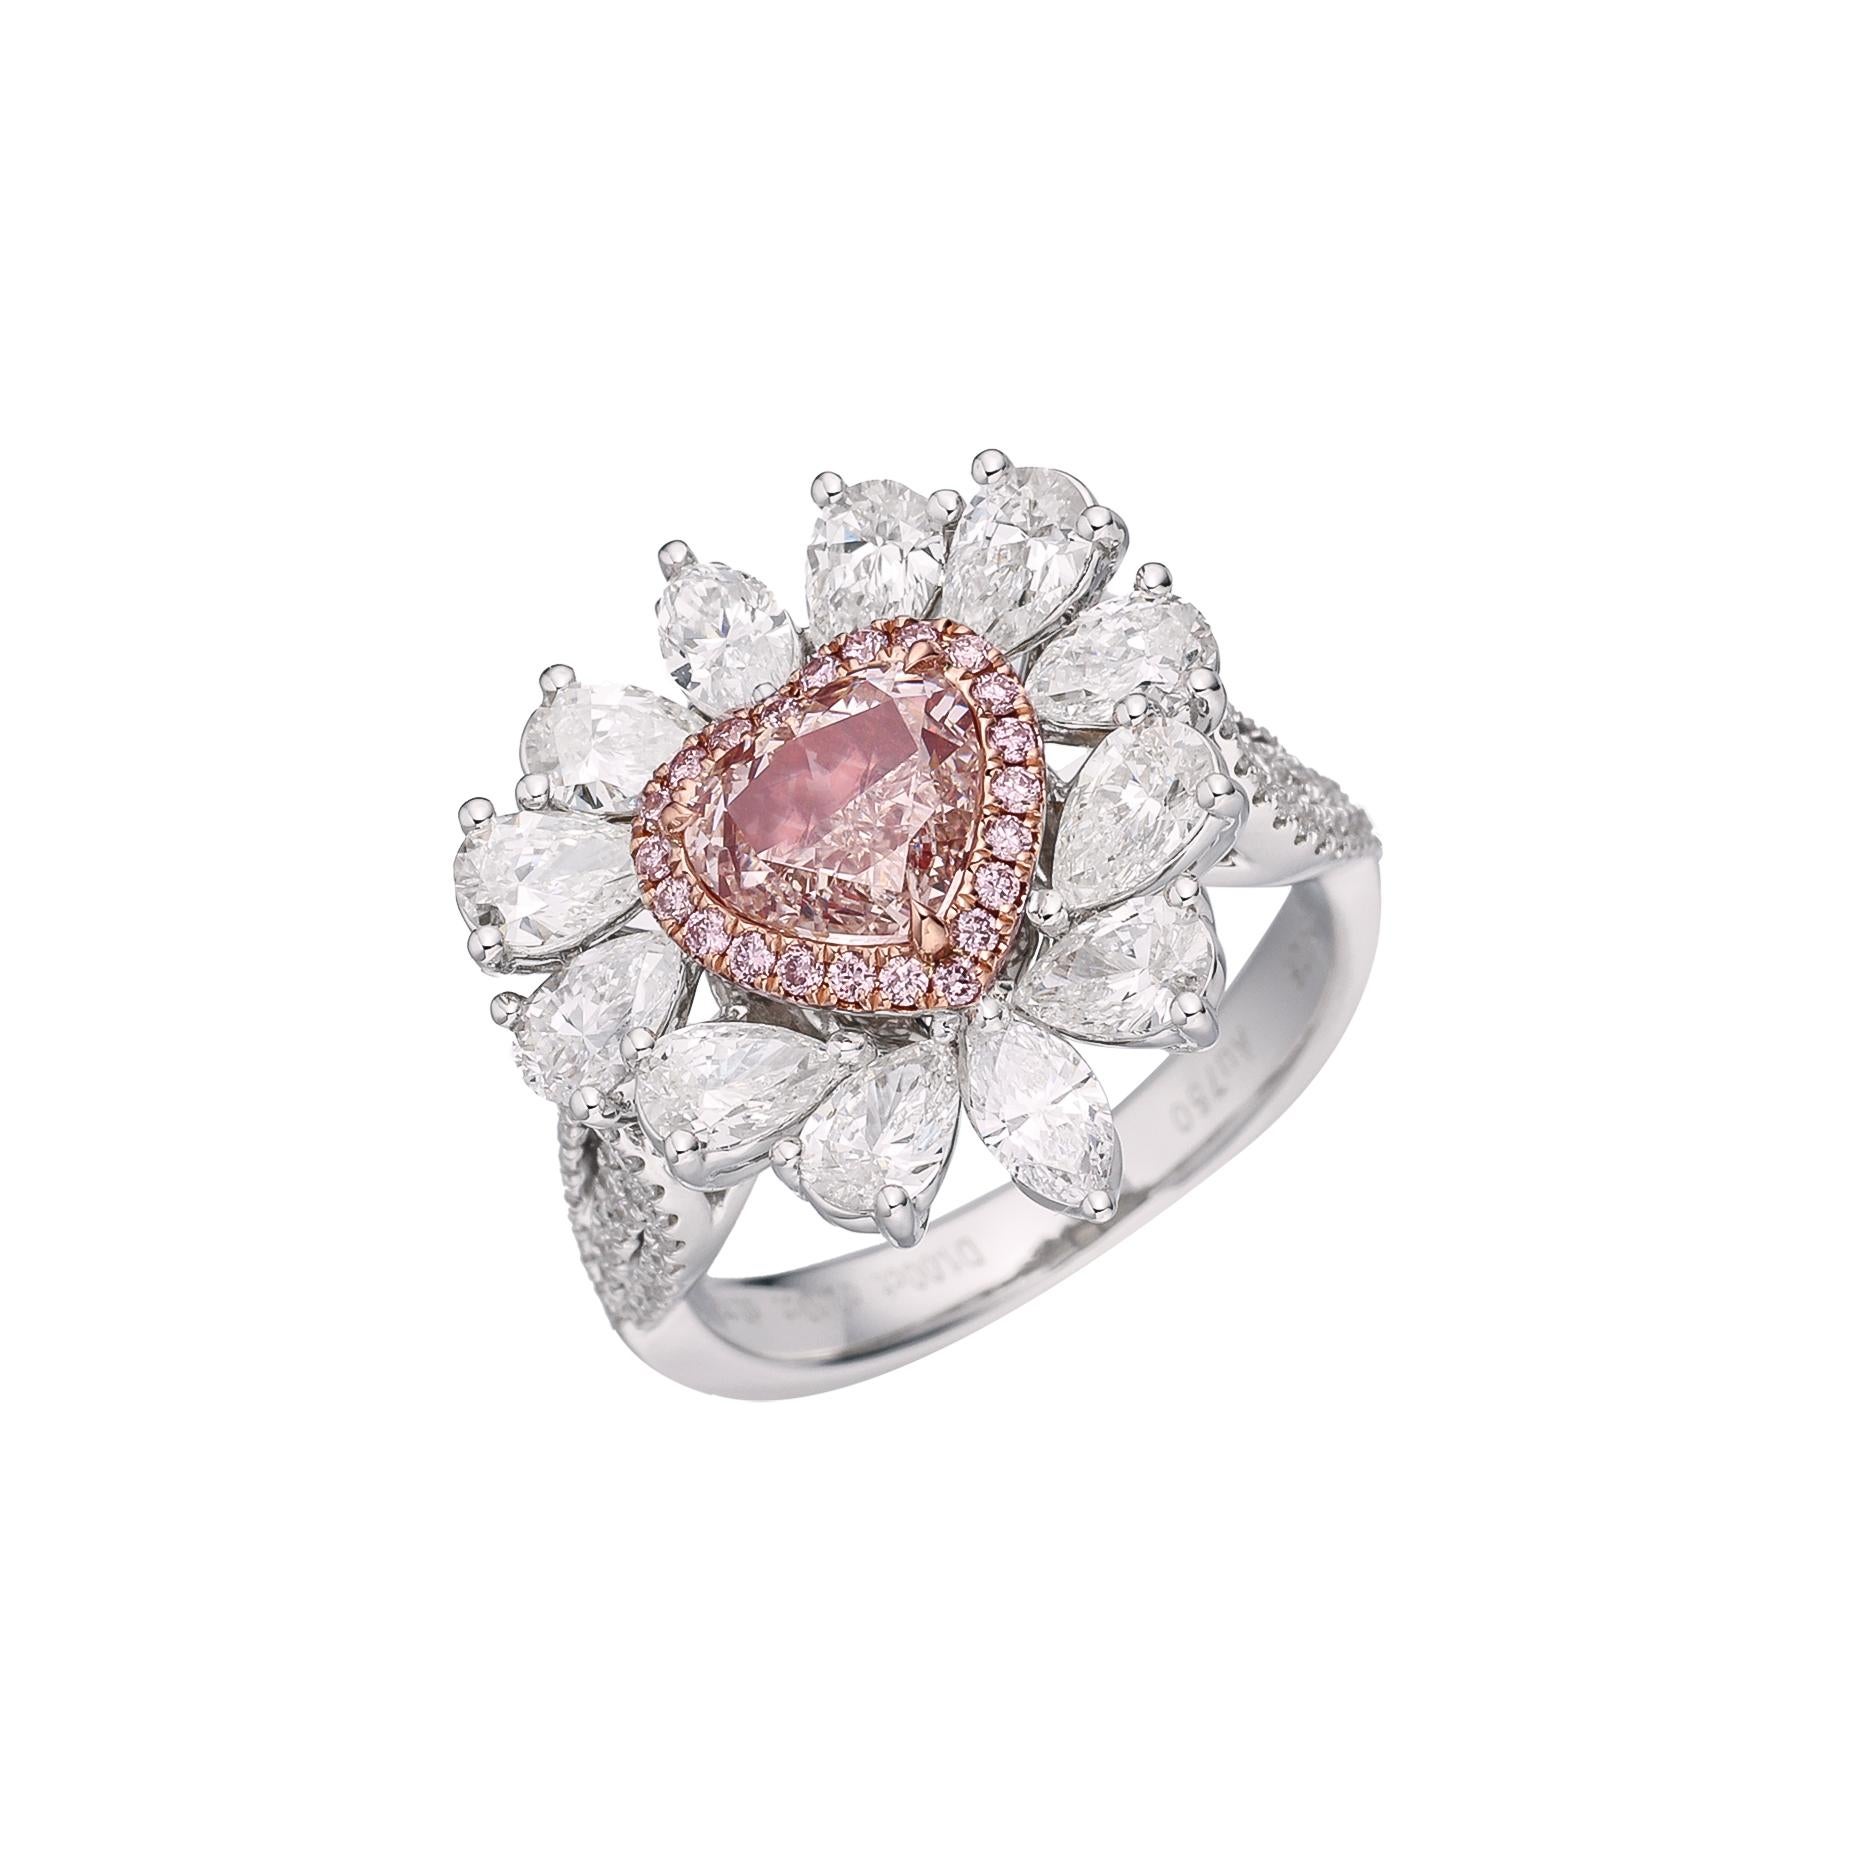 Introducing Elegance Personified: Discover the Exquisite GIA Certified 1.00ct Light Pinkish Brown Natural Heart Shape Diamond Solitaire Ring, a true masterpiece that captures the essence of beauty and sophistication. Crafted with precision and set